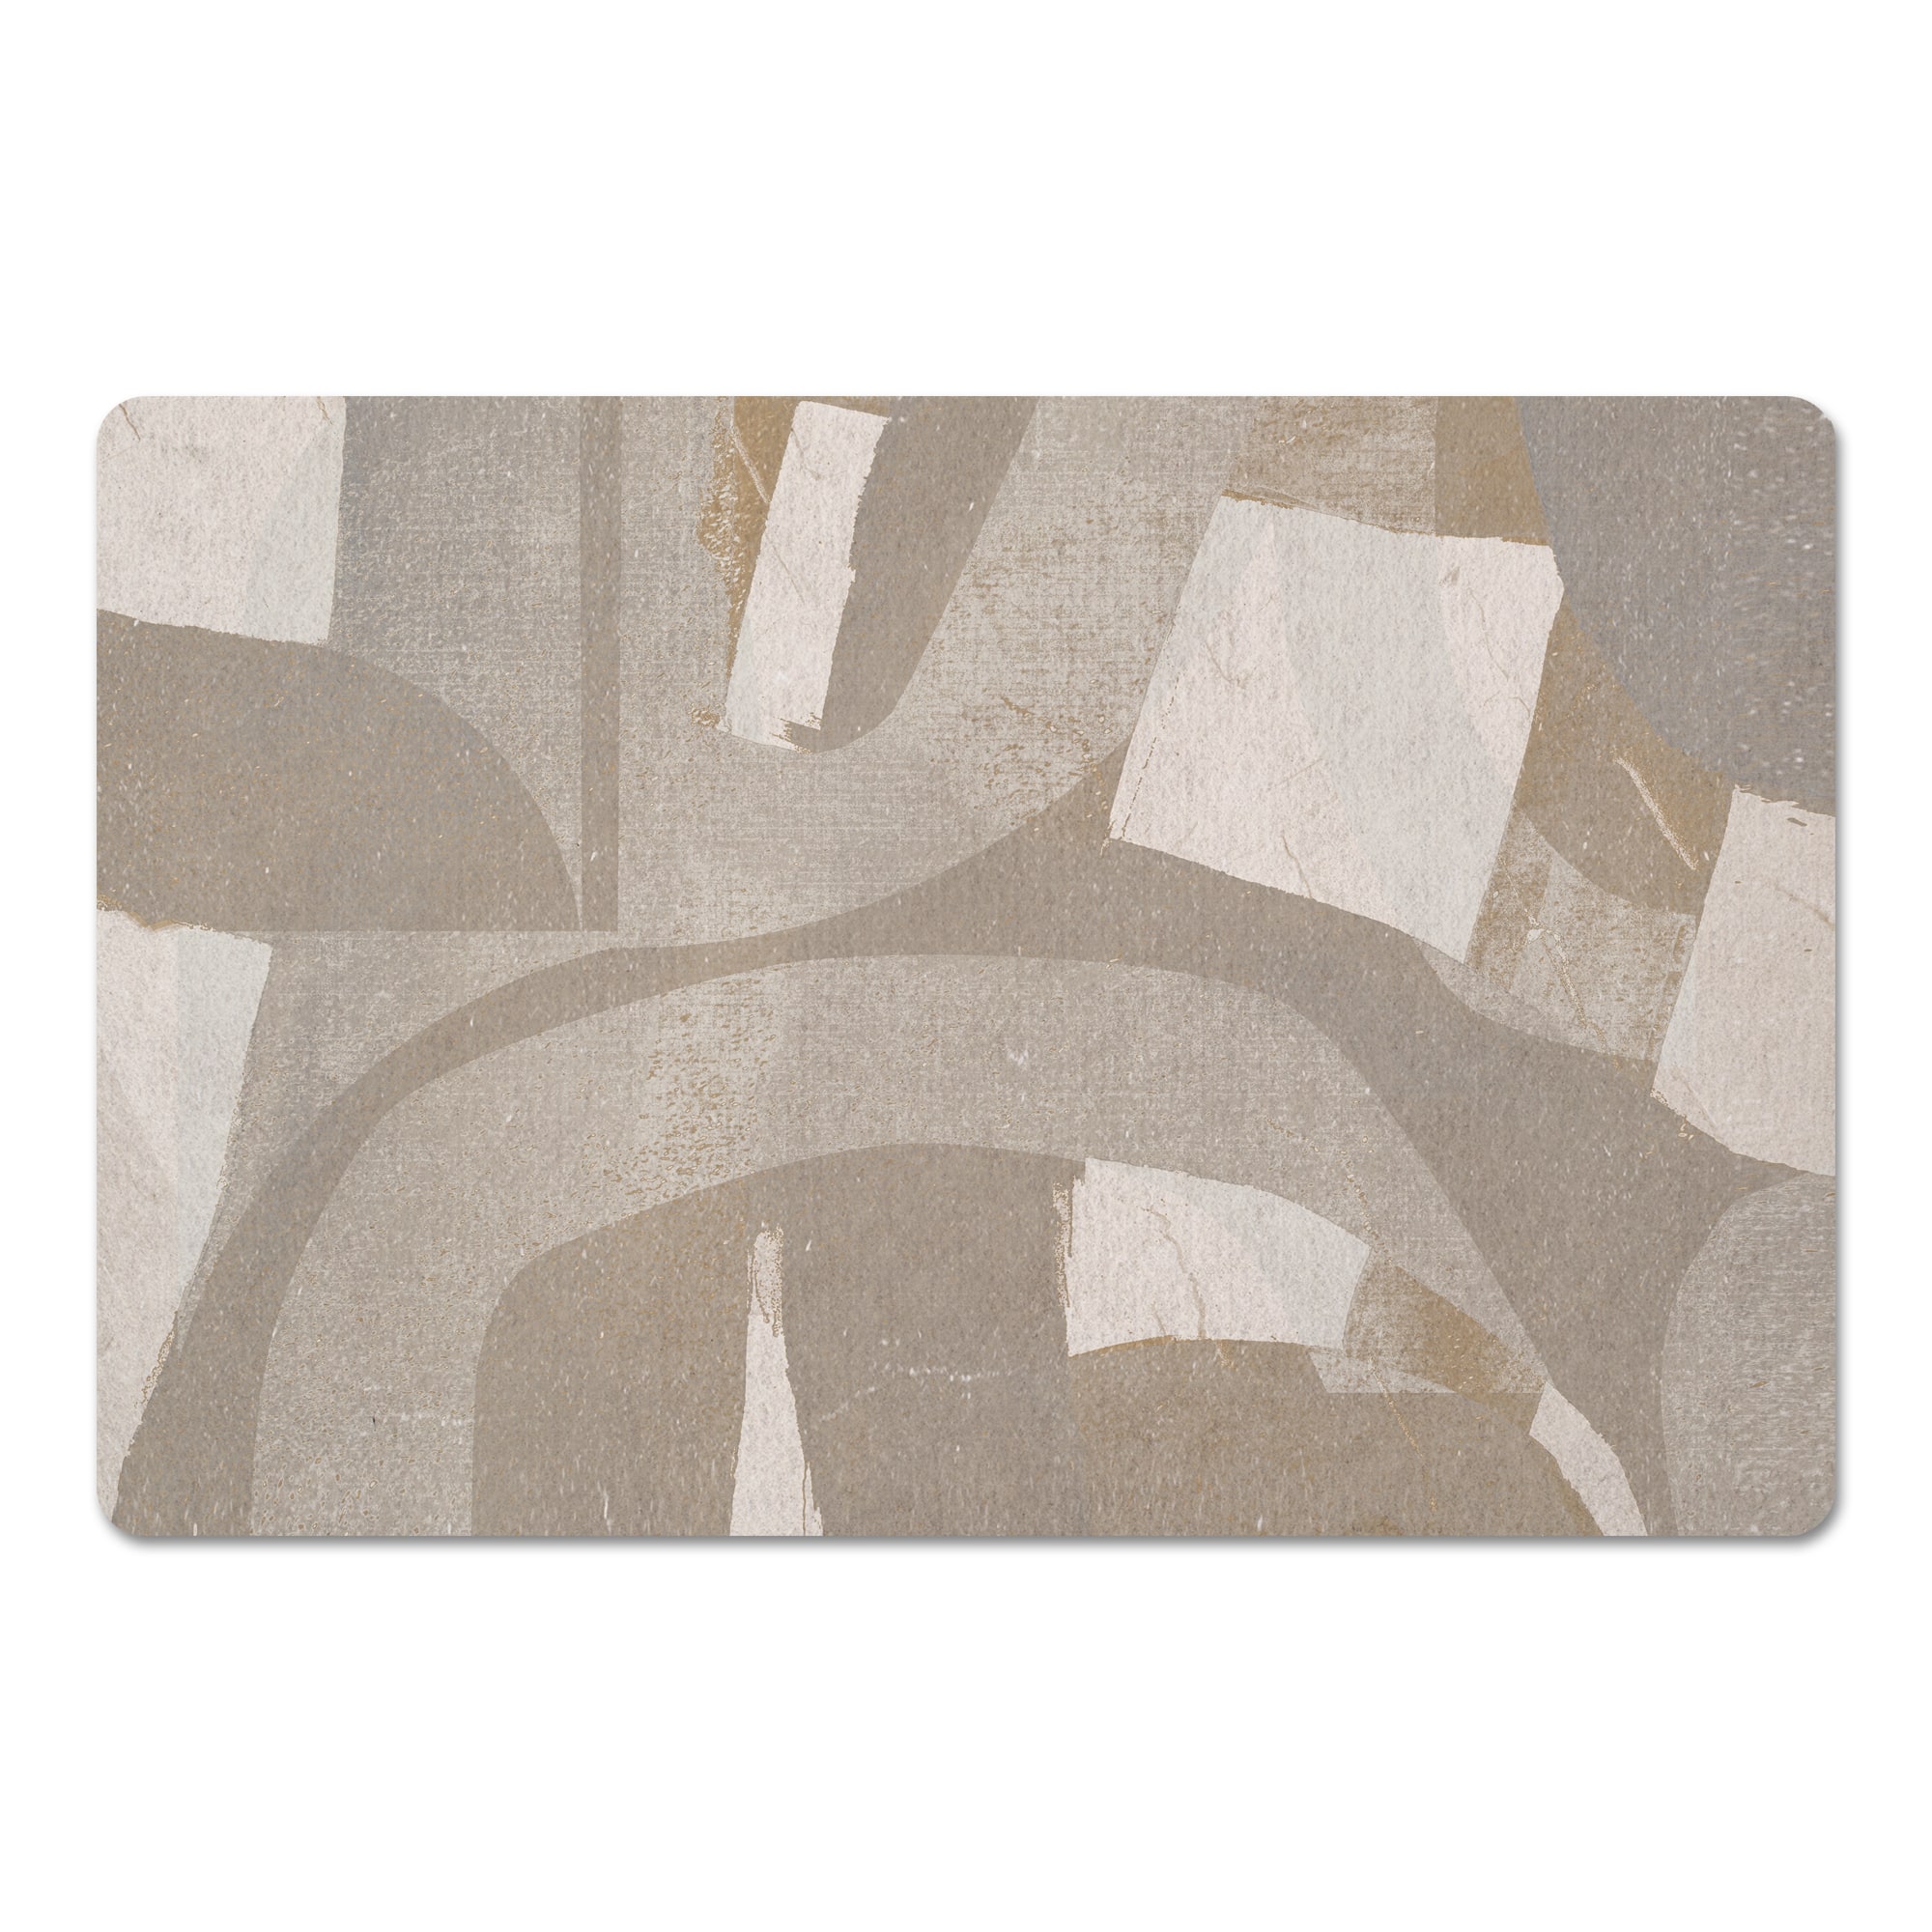 Abstract Layered Shapes Floor Mat